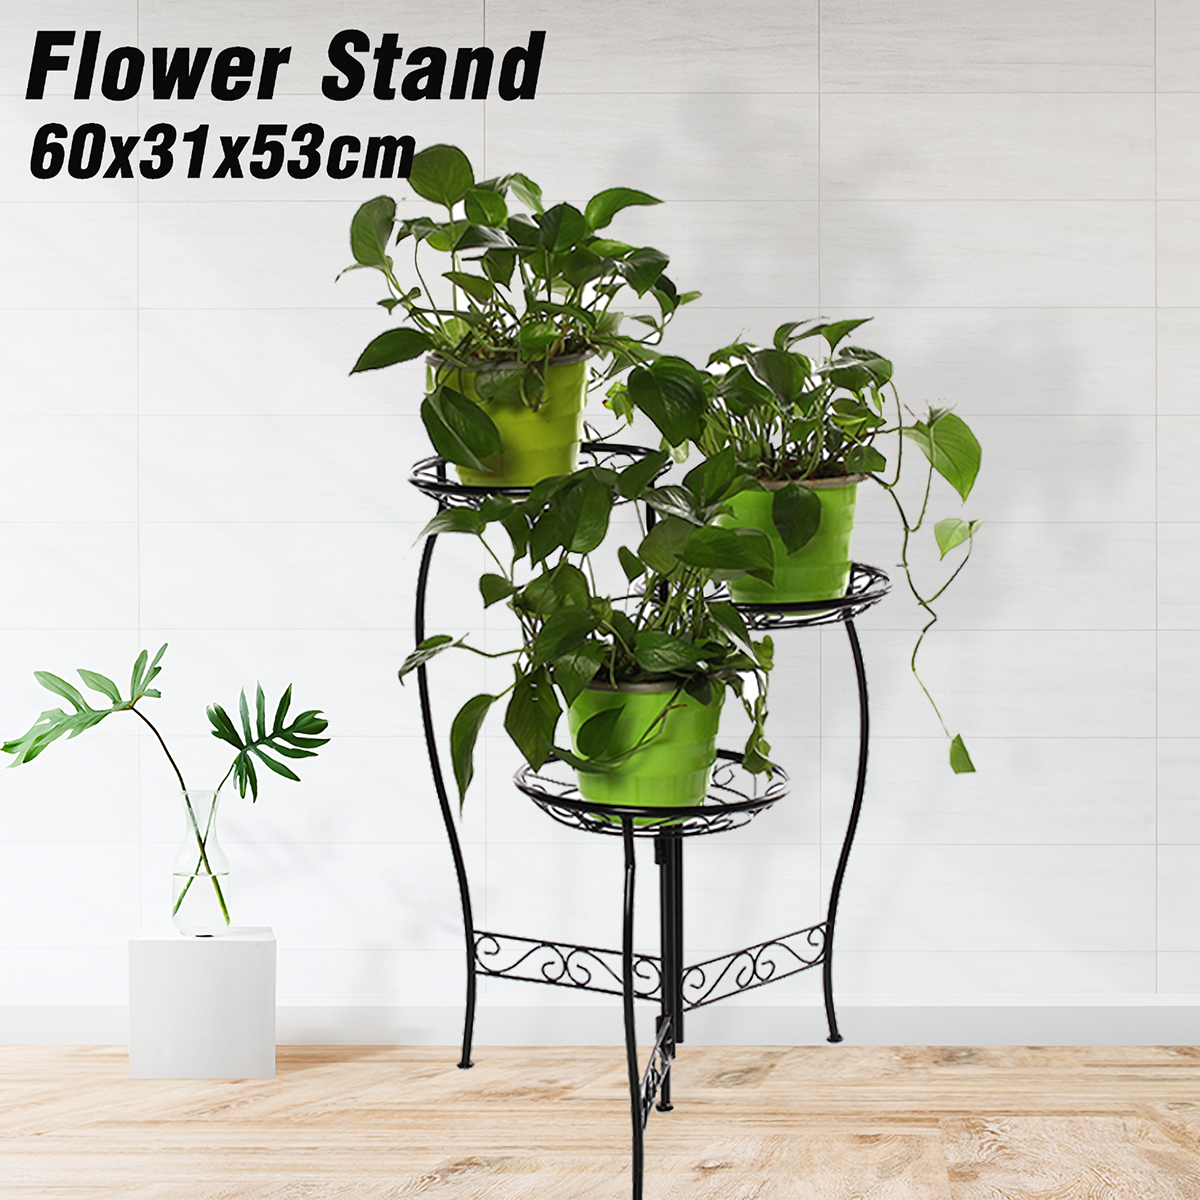 Metal-Flower-Pot-Stand-3-Tiers-Rounded-Plant--Holder-Indoor-Outdoor-Flower-Plant-Stand-Displaying-Ra-1797075-1